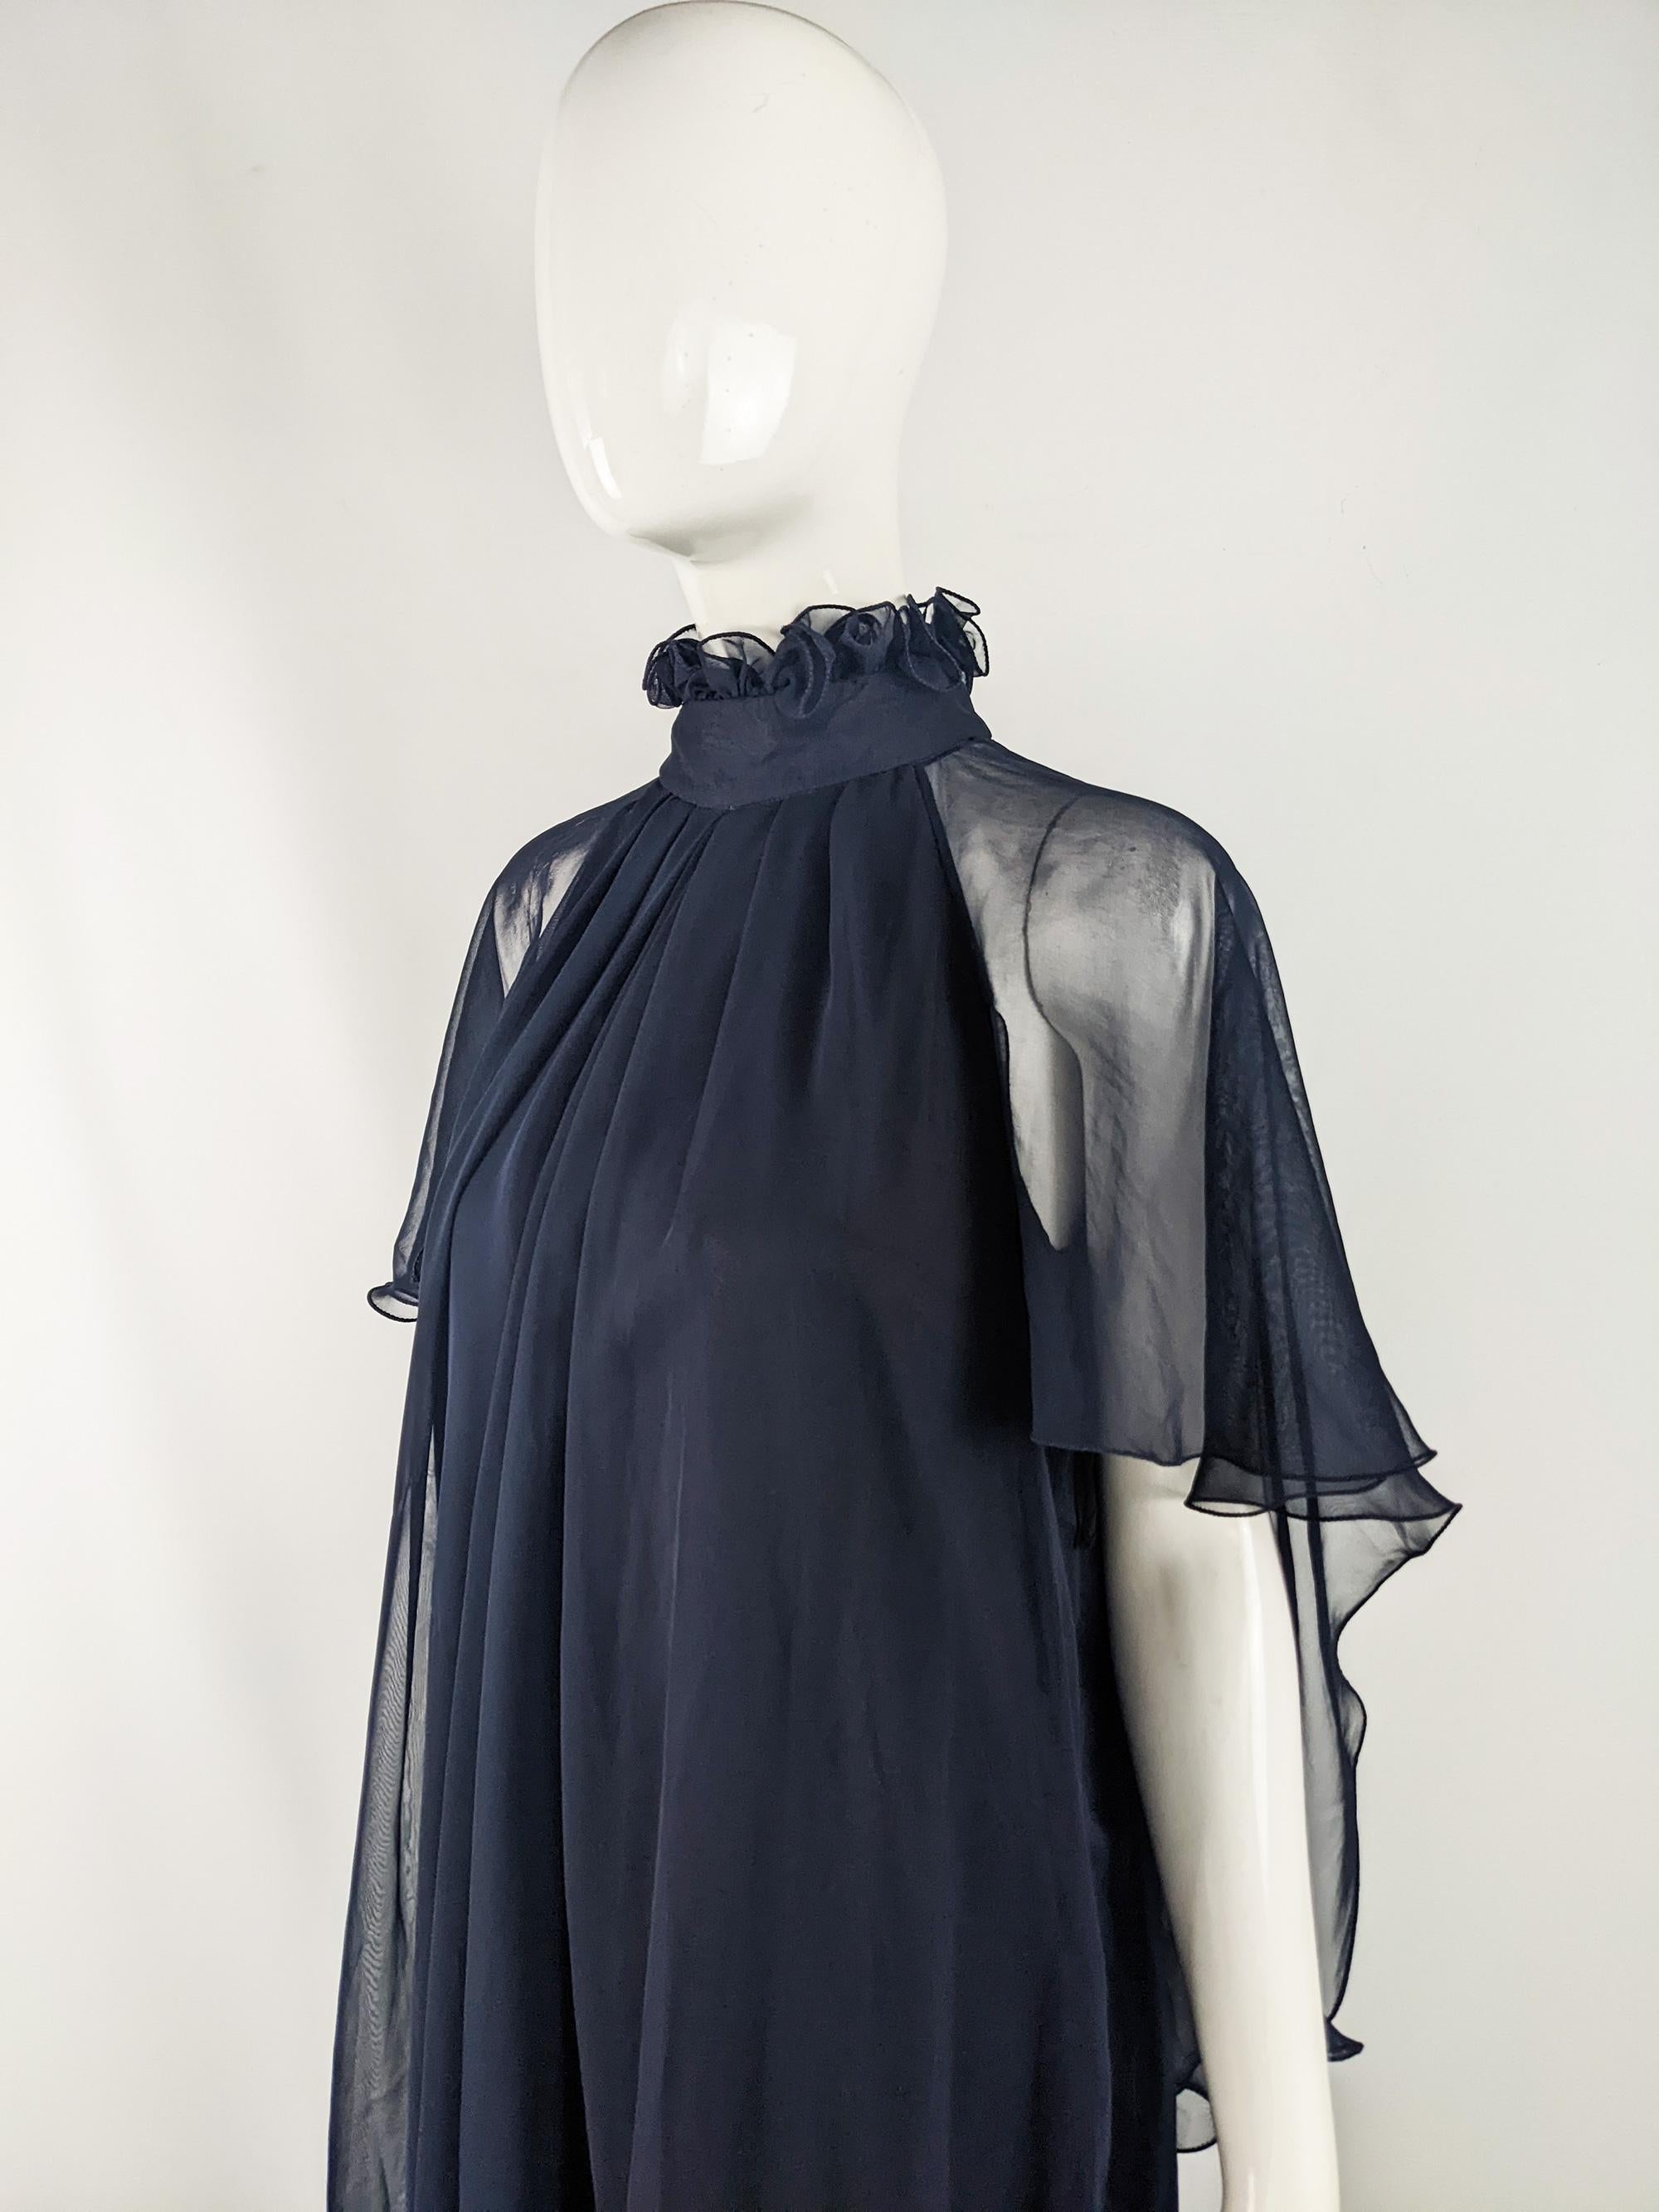 Women's Jean Varon Vintage 1970s Navy Blue Chiffon Dress Cape Sleeves Evening Gown For Sale